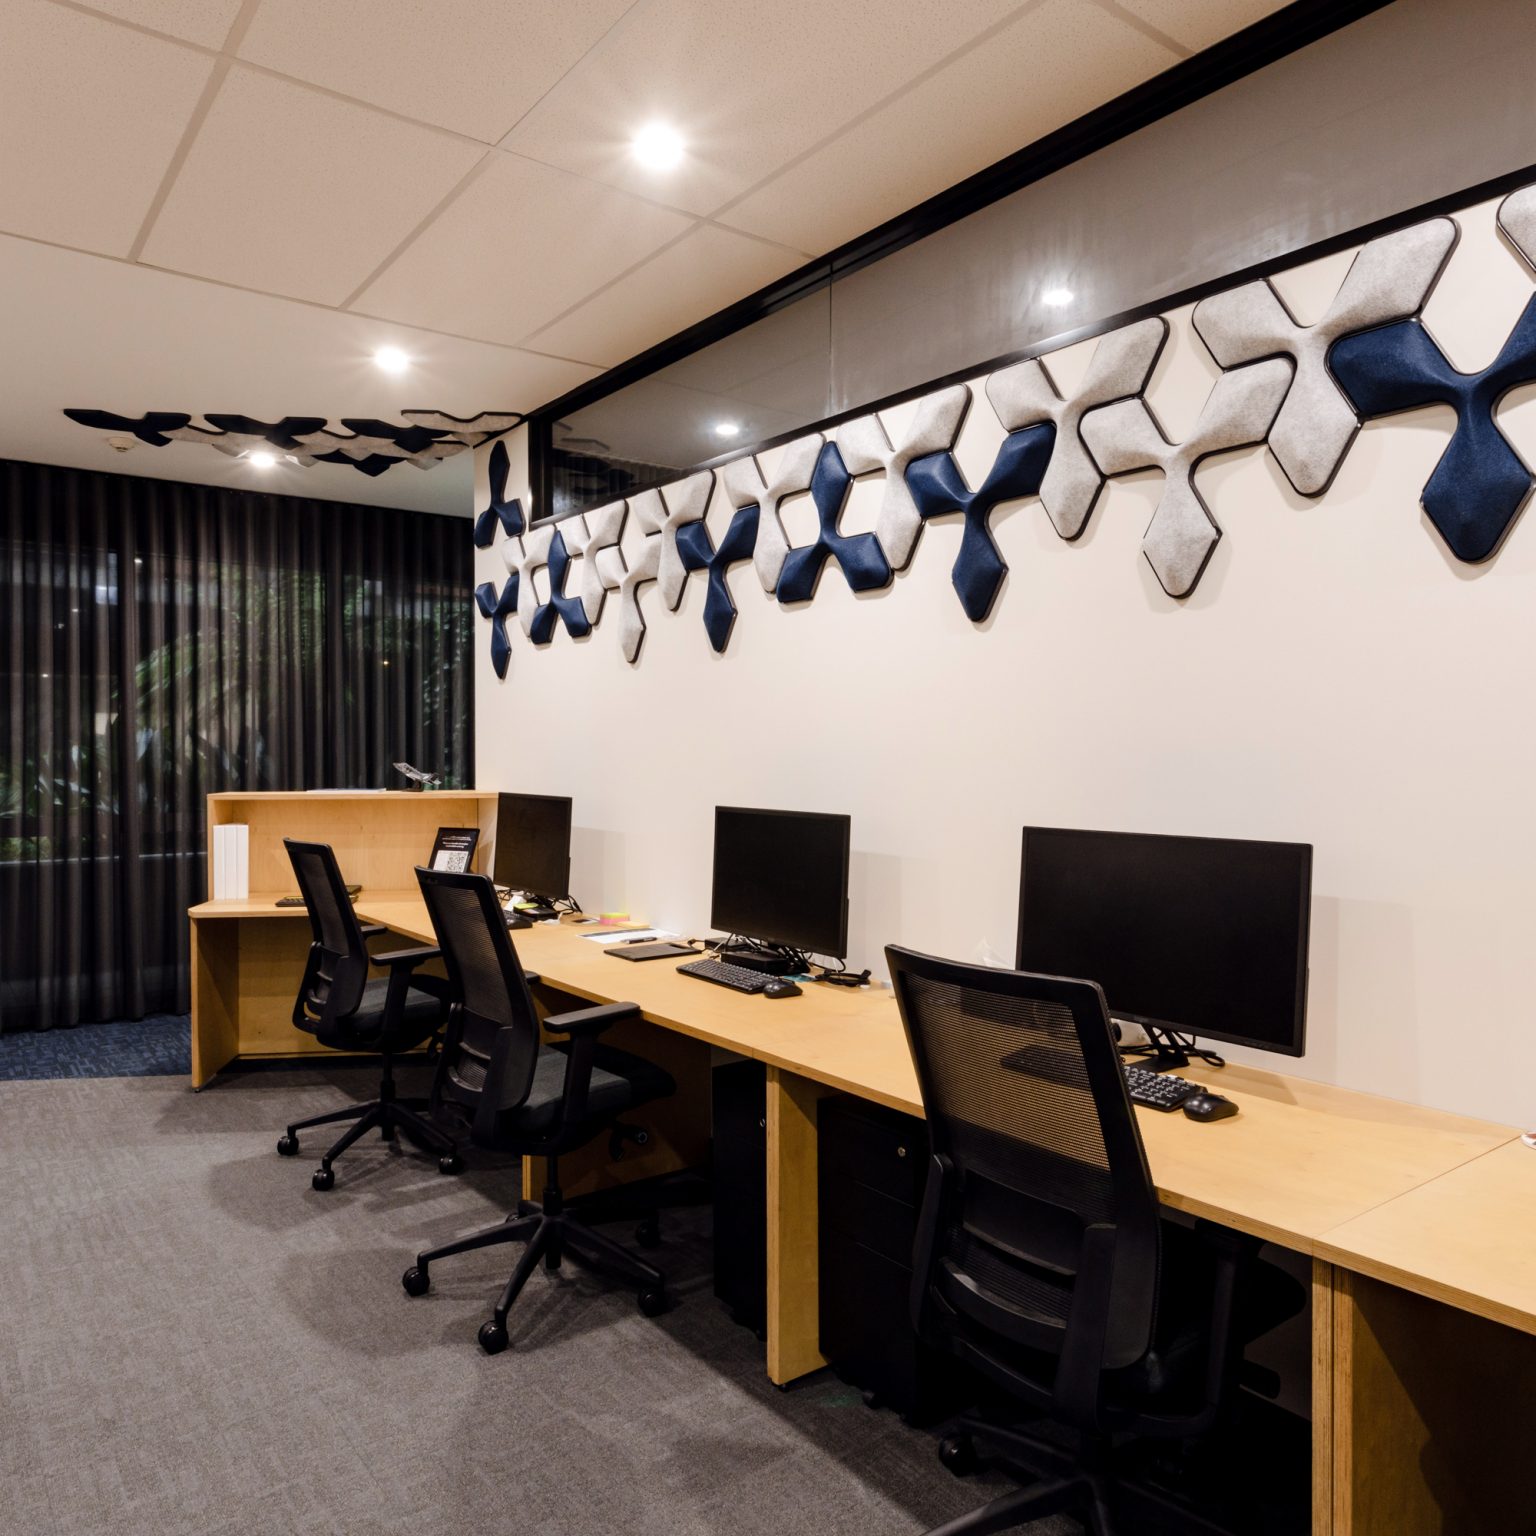 A contemporary office space interior, showcasing expert commercial interior design by a leading interior designer in Canberra